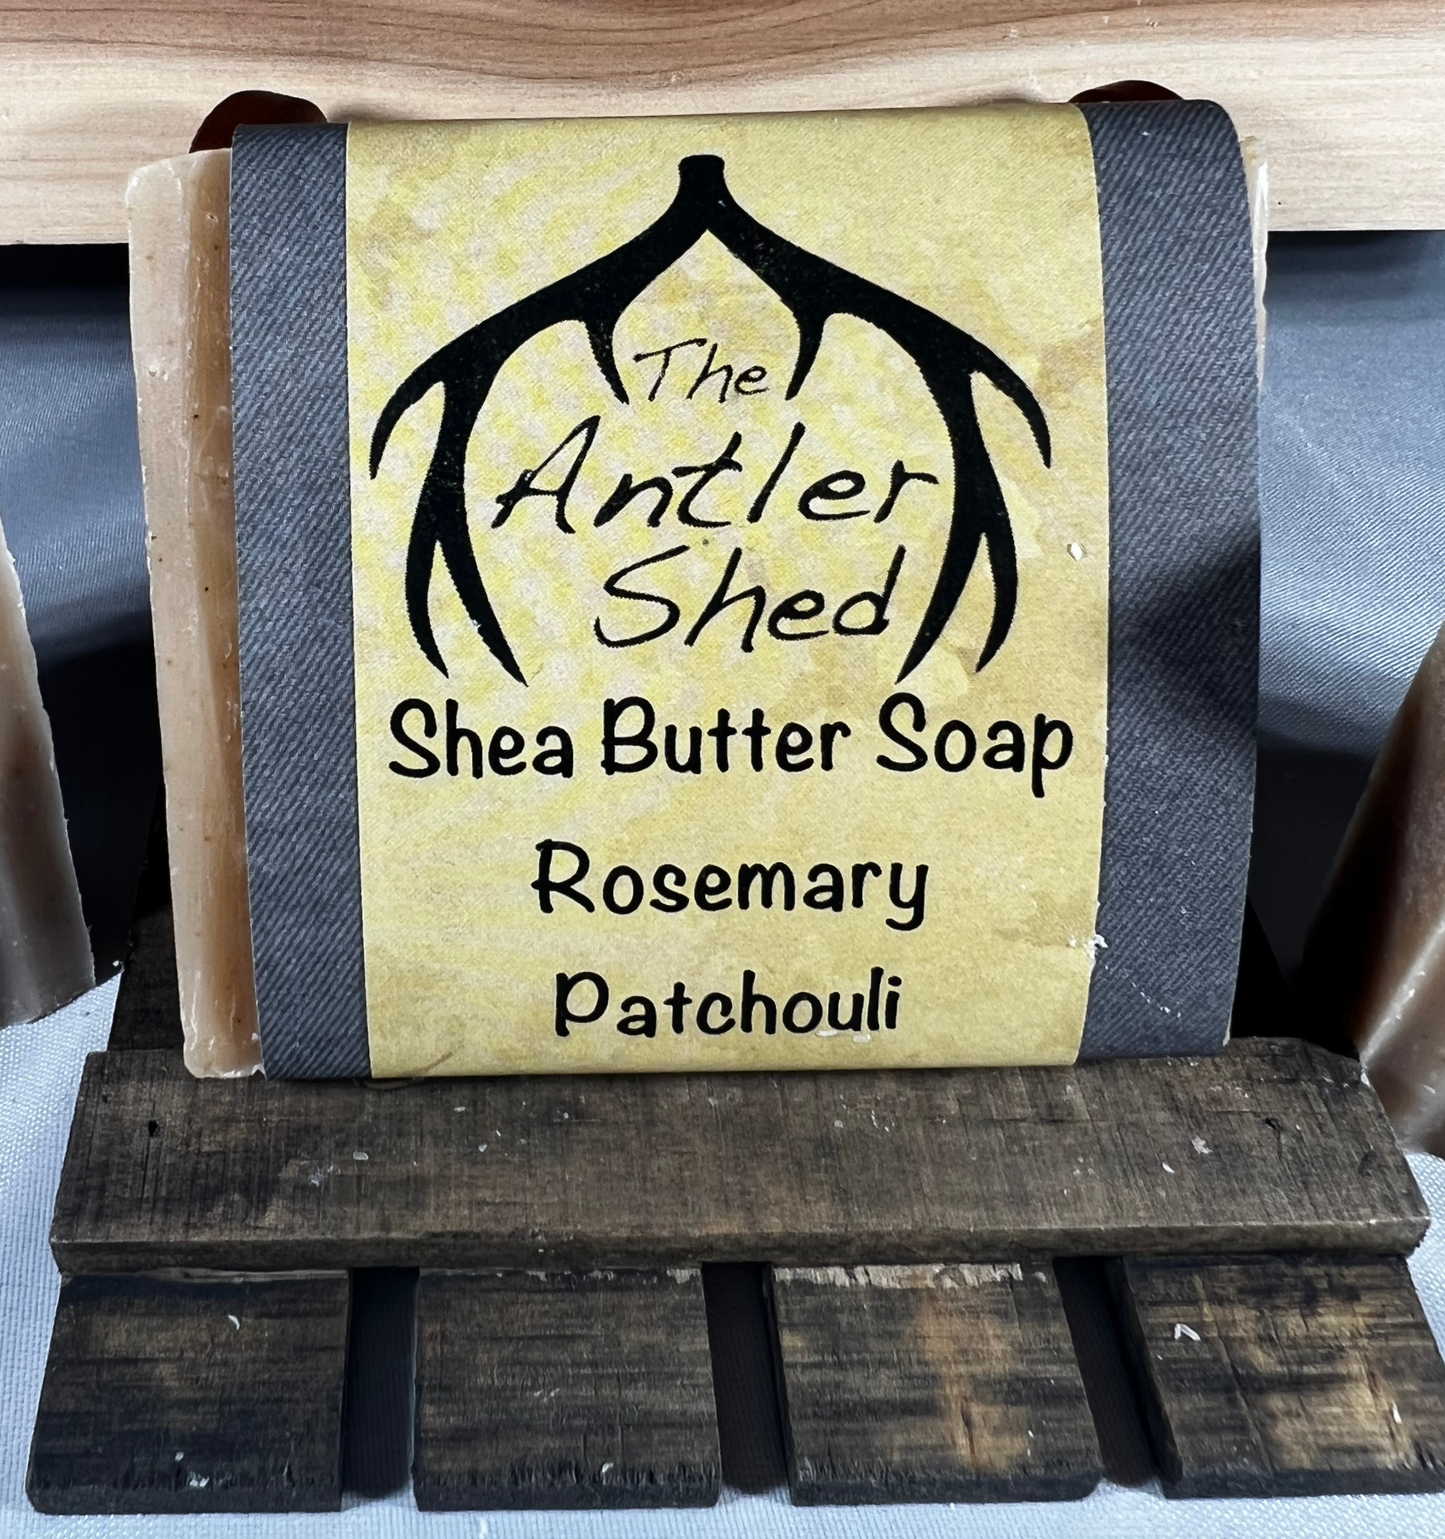 Rosemary Patchouli Shea Butter Soap